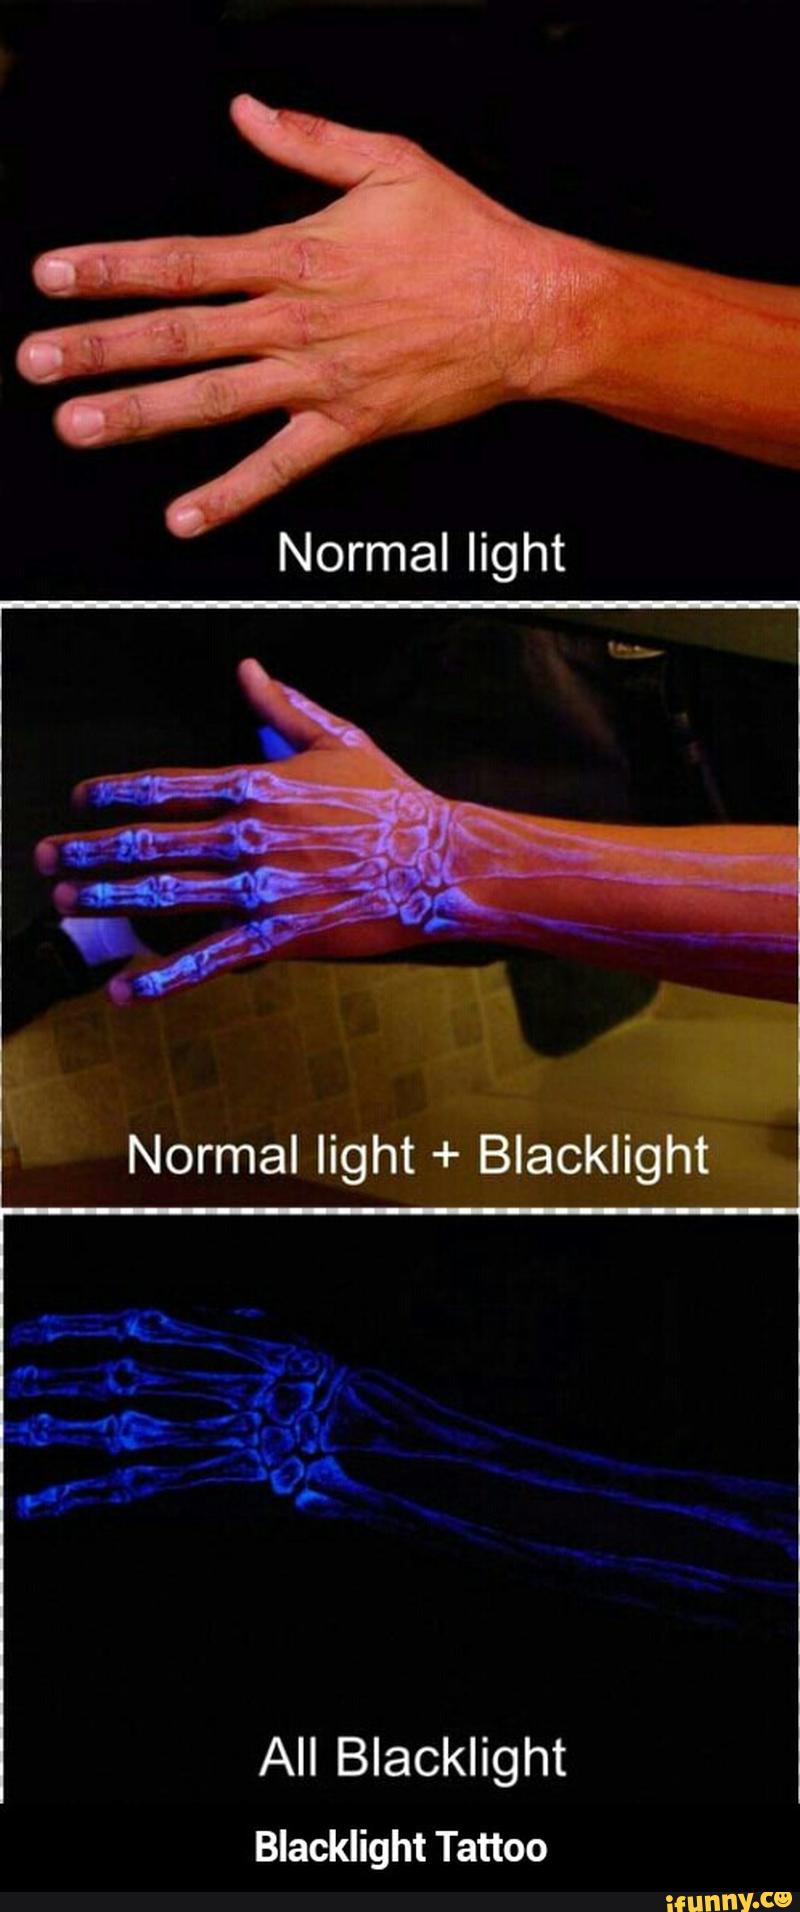 UV Tattoo In Normal Light And All Blacklight On Arm